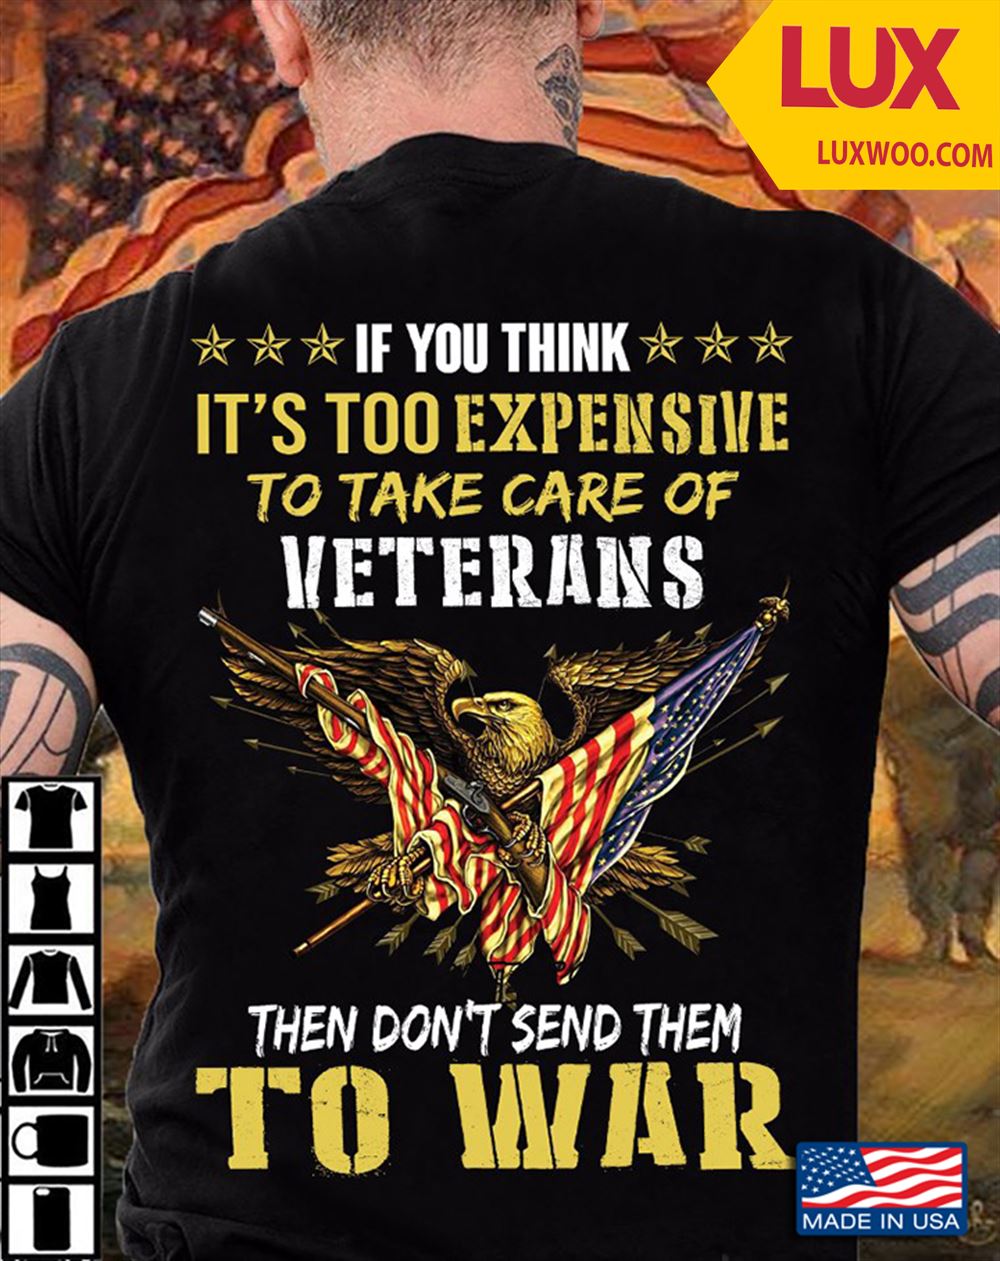 If You Think Its Too Expensive To Take Care Of Veterans Then Dont Send Them To War Shirt Size Up To 5xl